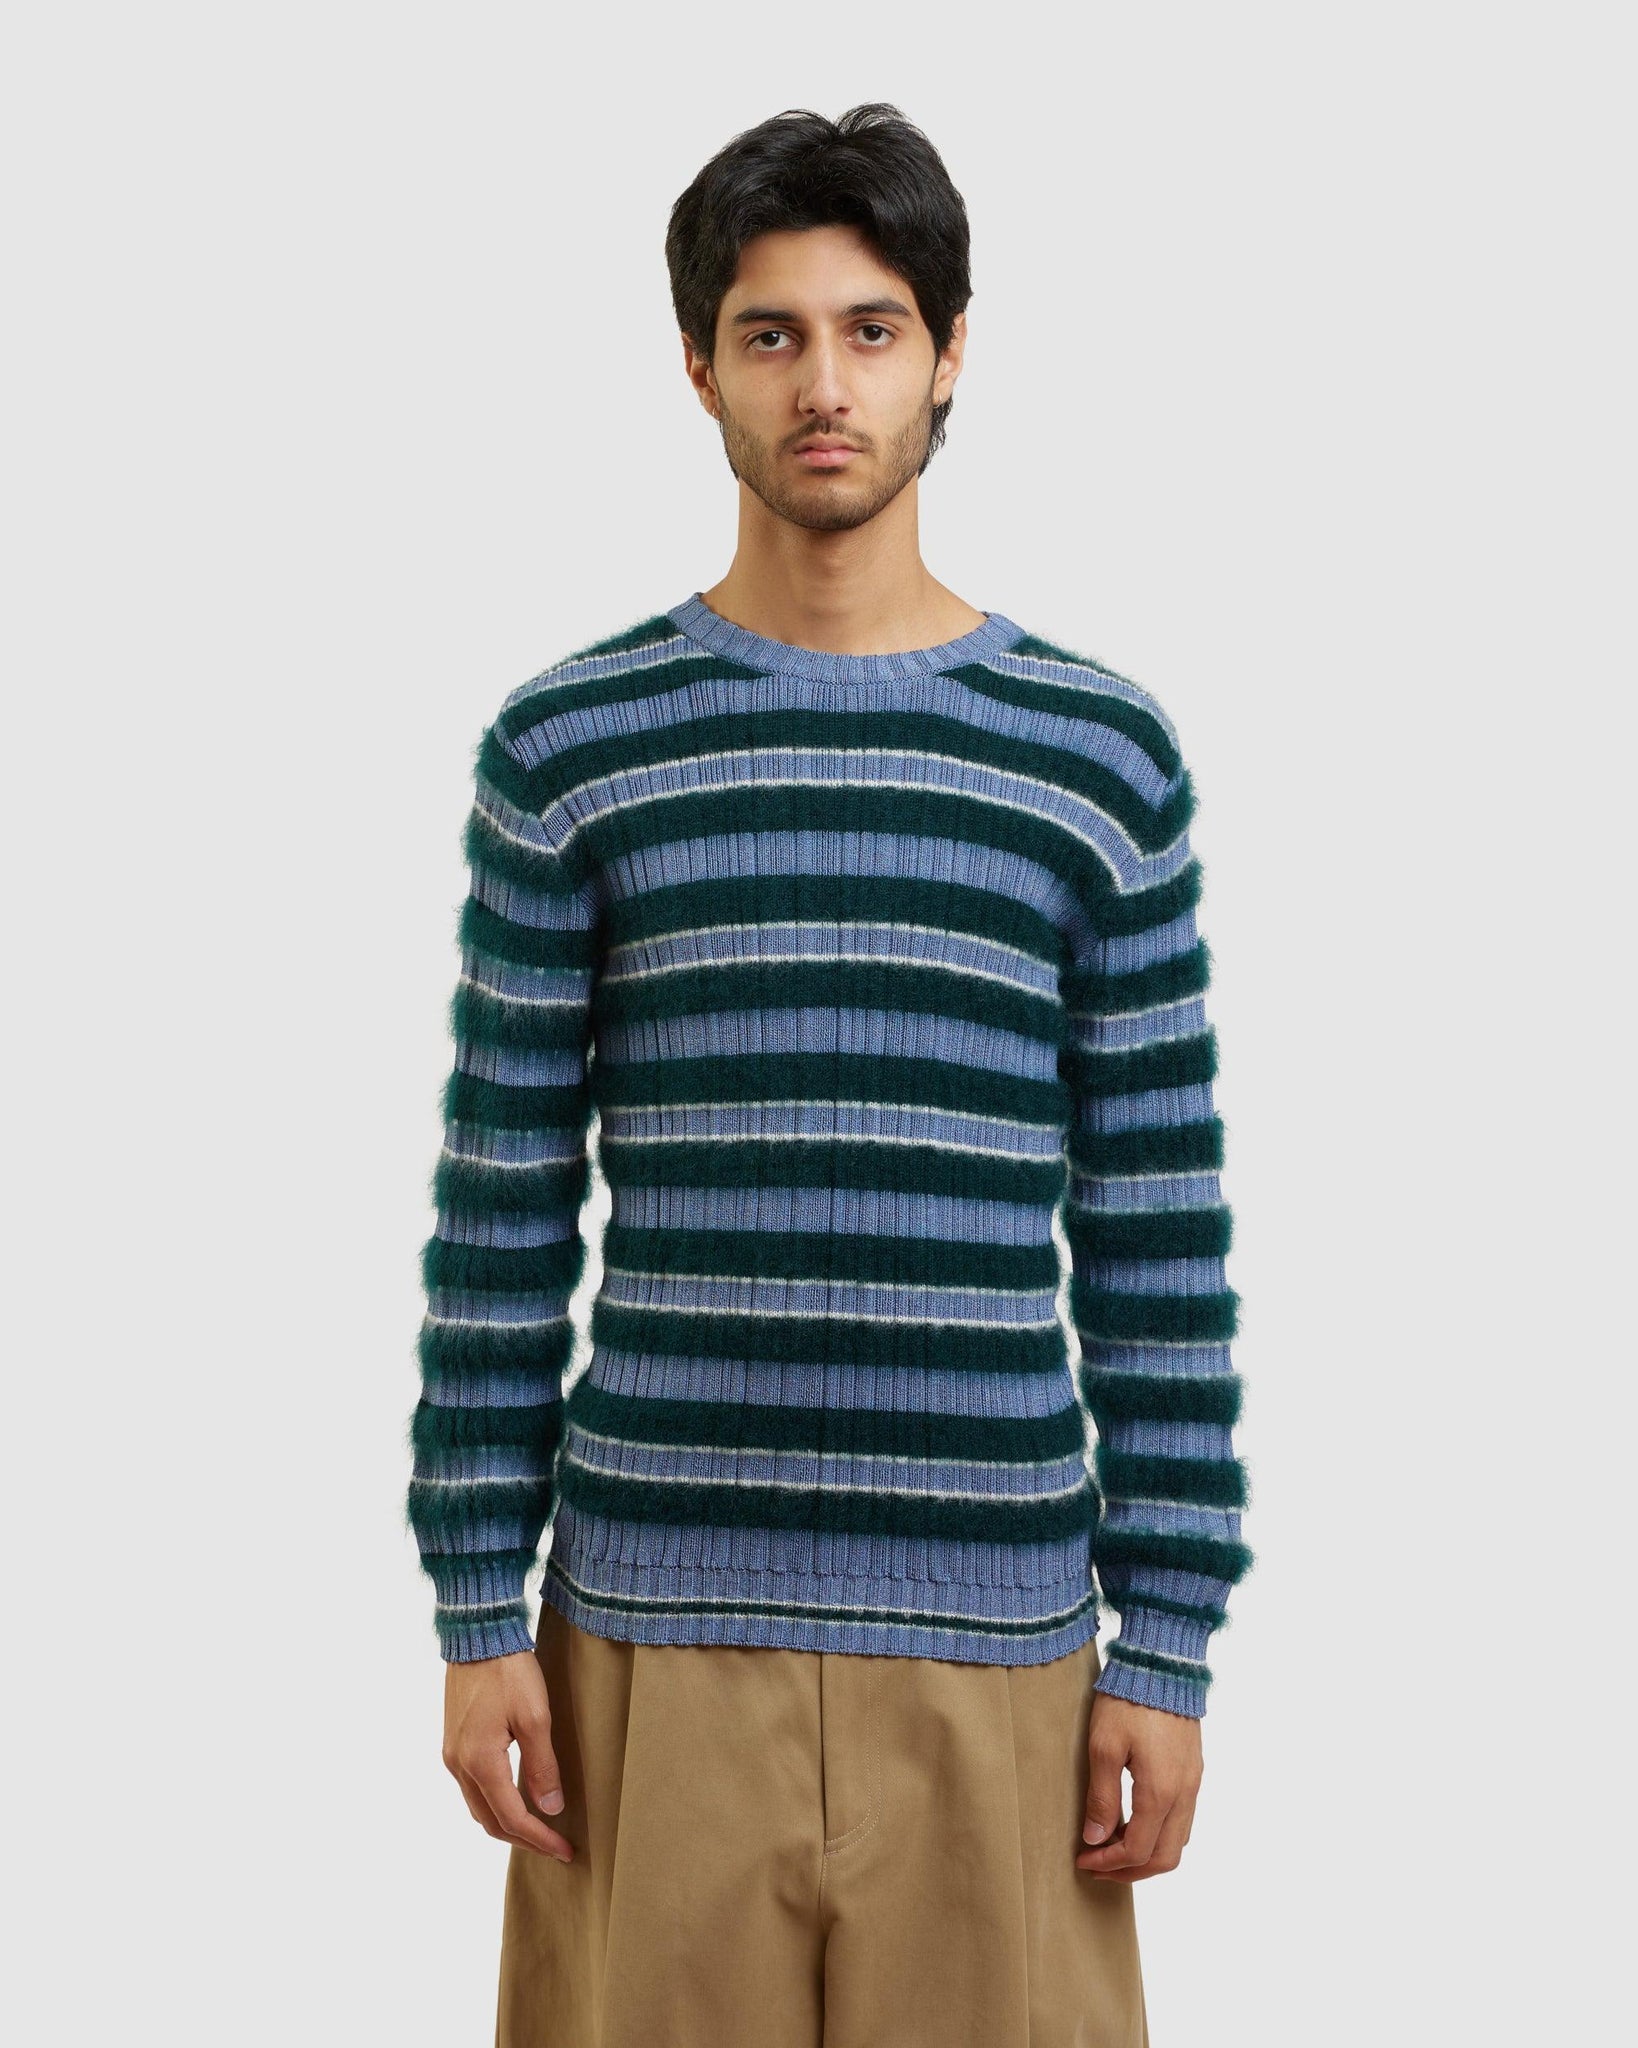 Toothpaste Knit Sweater - {{ collection.title }} - Chinatown Country Club 